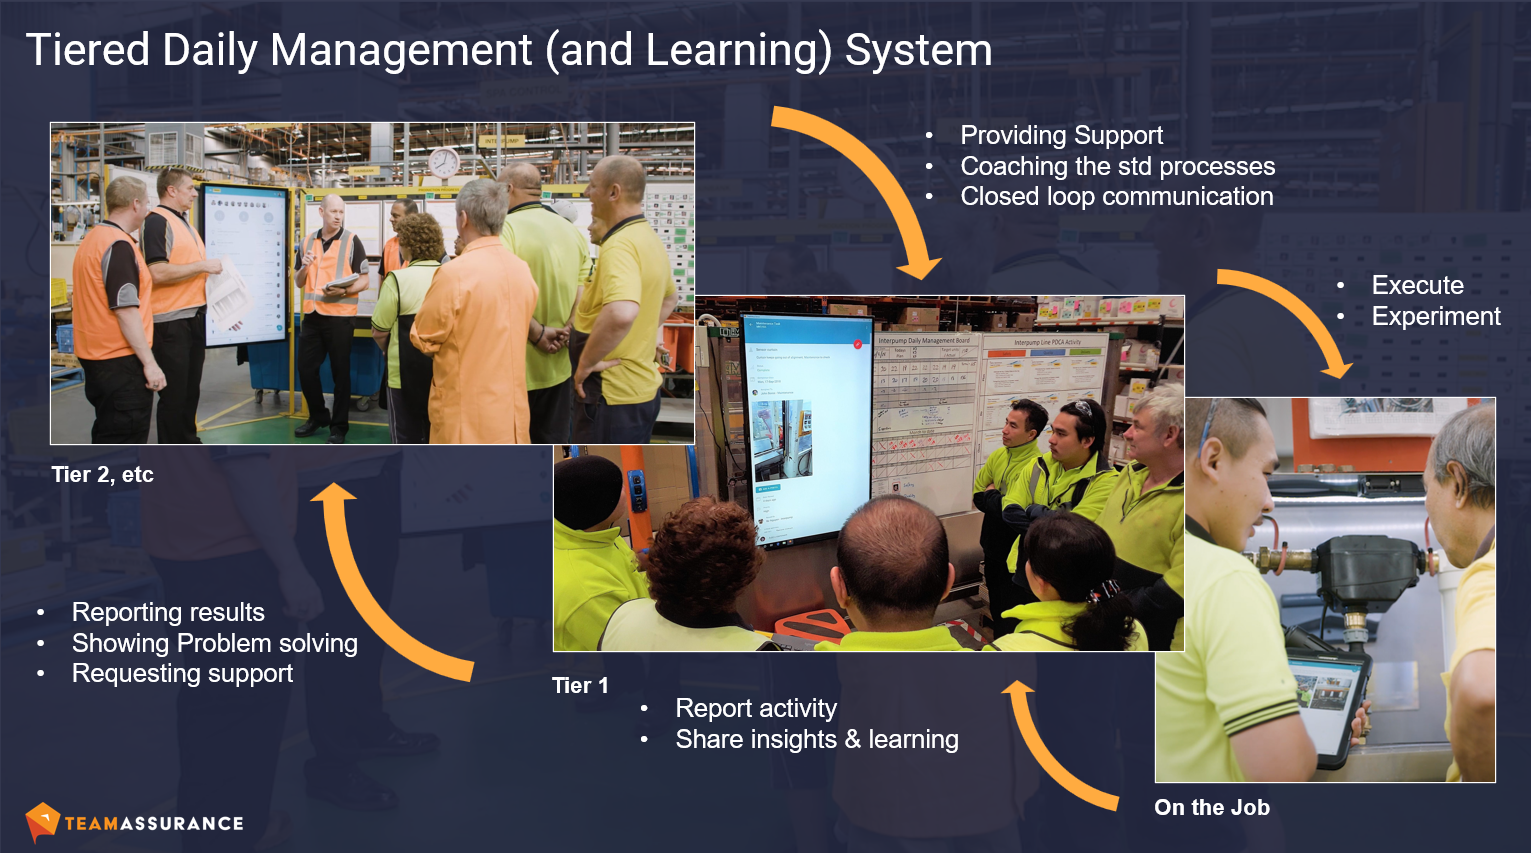 Tiered Daily Management and Learning System Flow Diagram